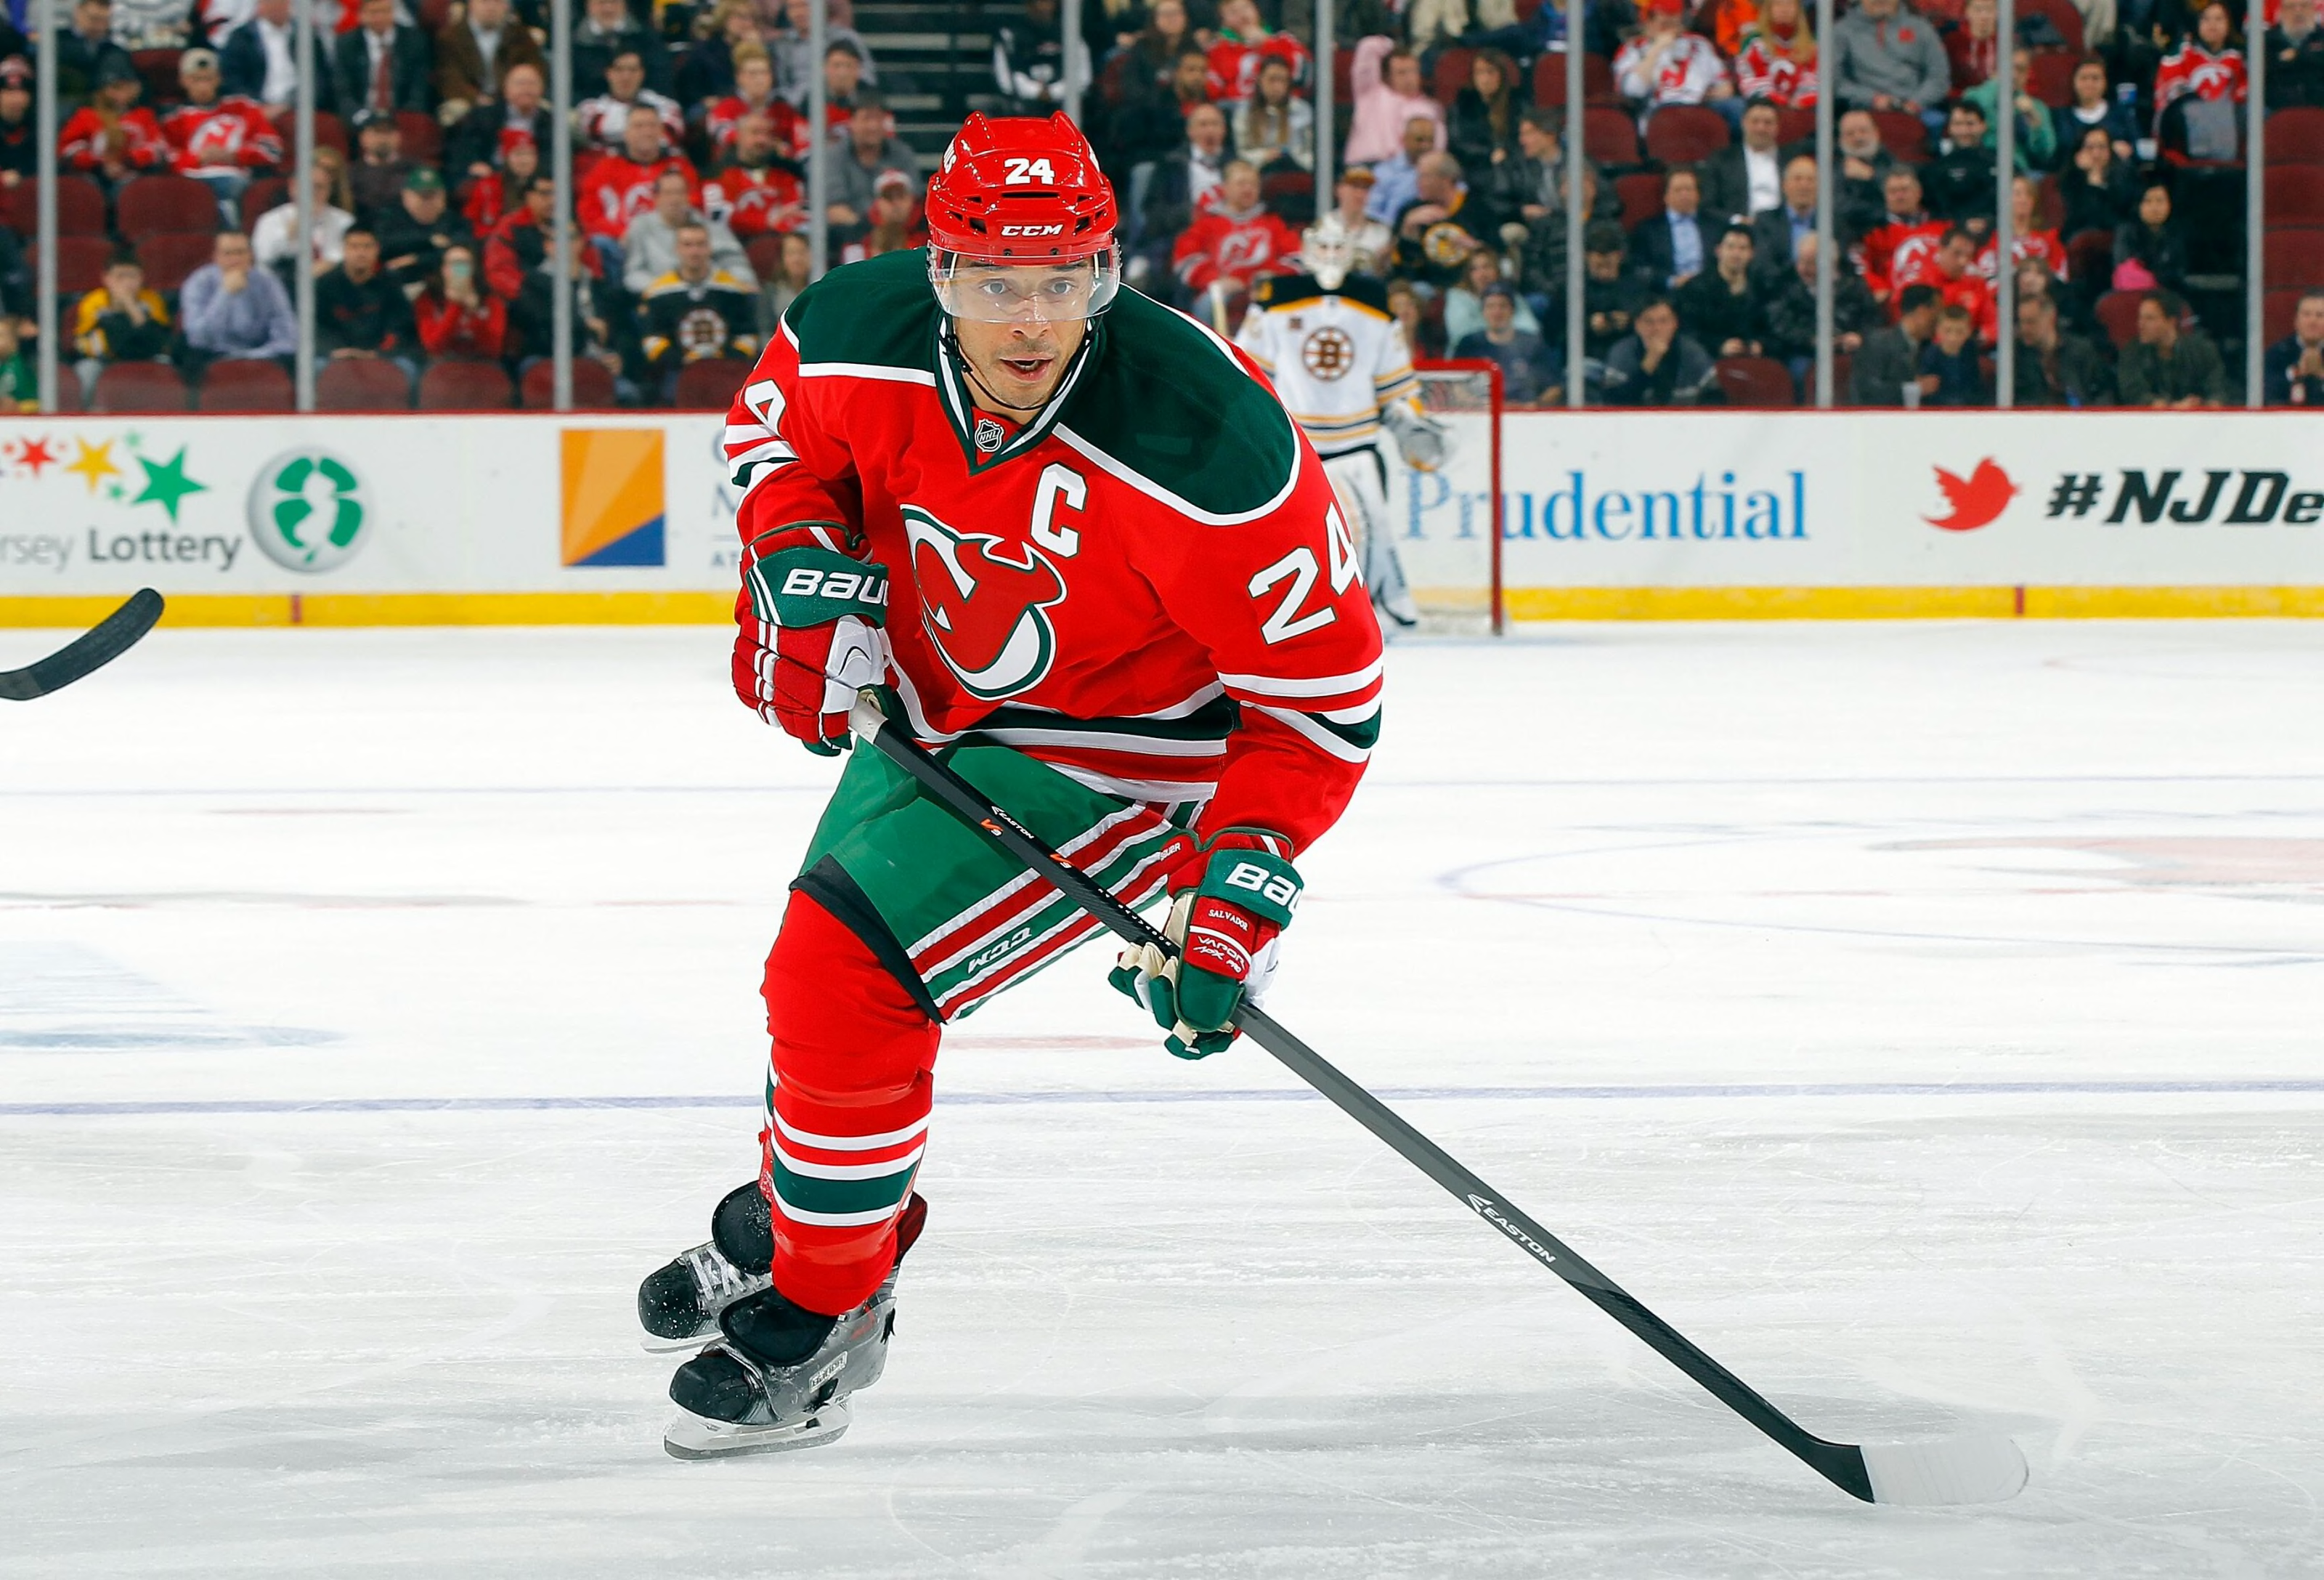 Best New Jersey Devils Hockey Players of All TIme